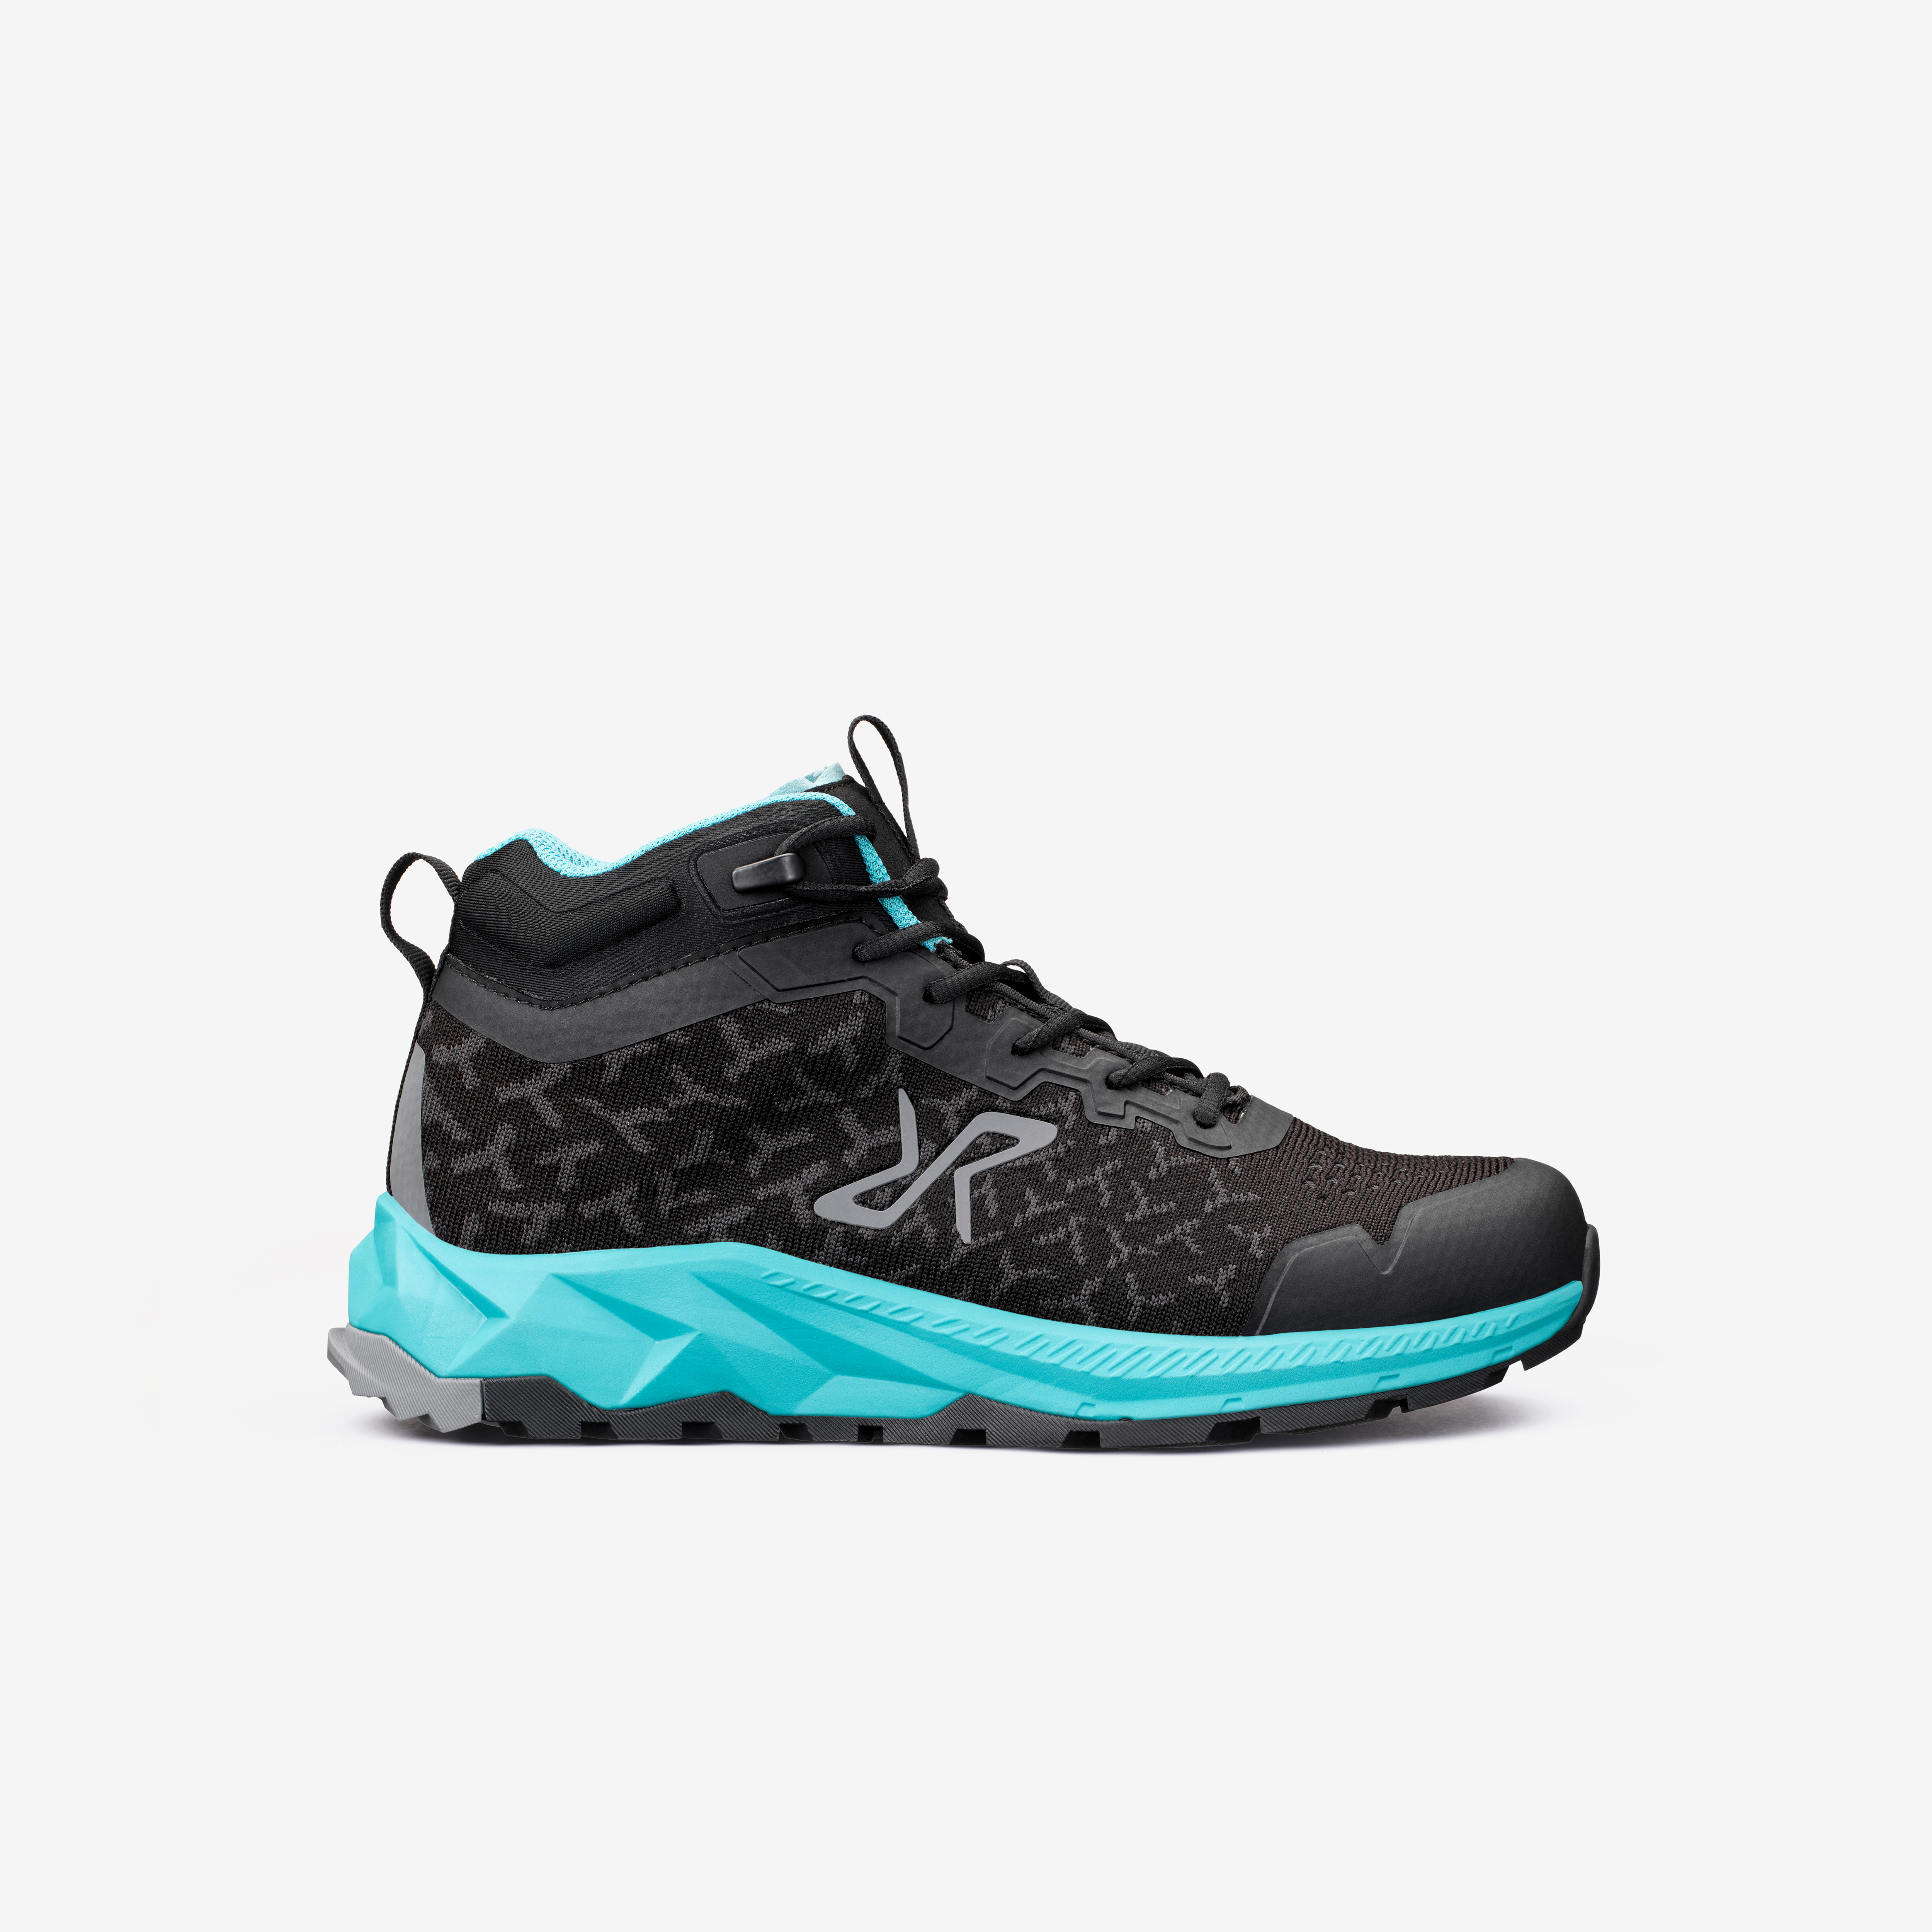 Trailknit Waterproof Mid Hiking Shoes Black/Turquoise Naiset